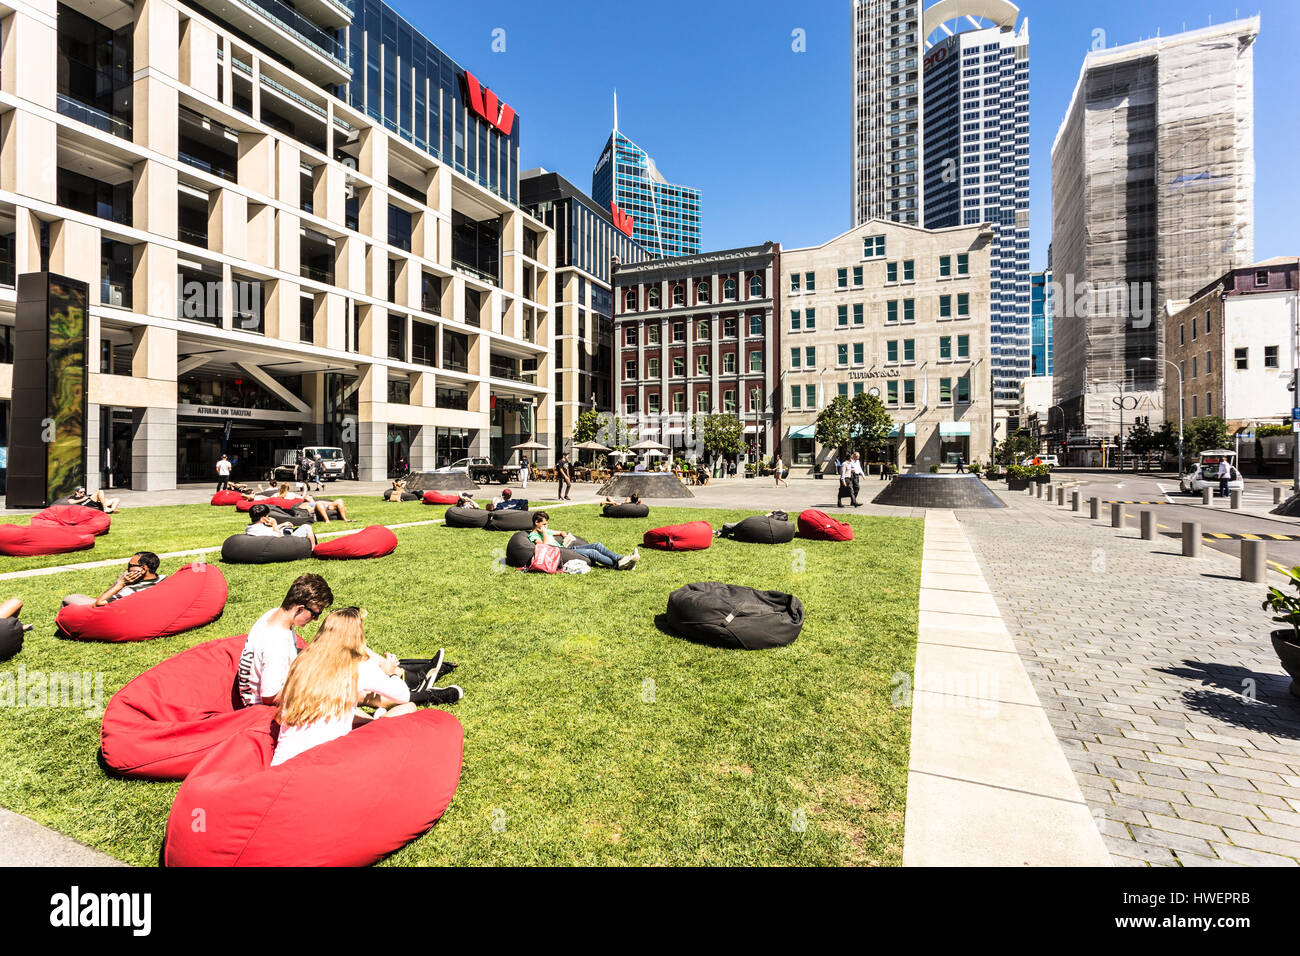 AUCKLAND, NEW ZEALAND - MARCH 1, 2017: People relax on garden sofas in a park in Britomart in downtown in Auckland, New Zealand largest city on a sunn Stock Photo